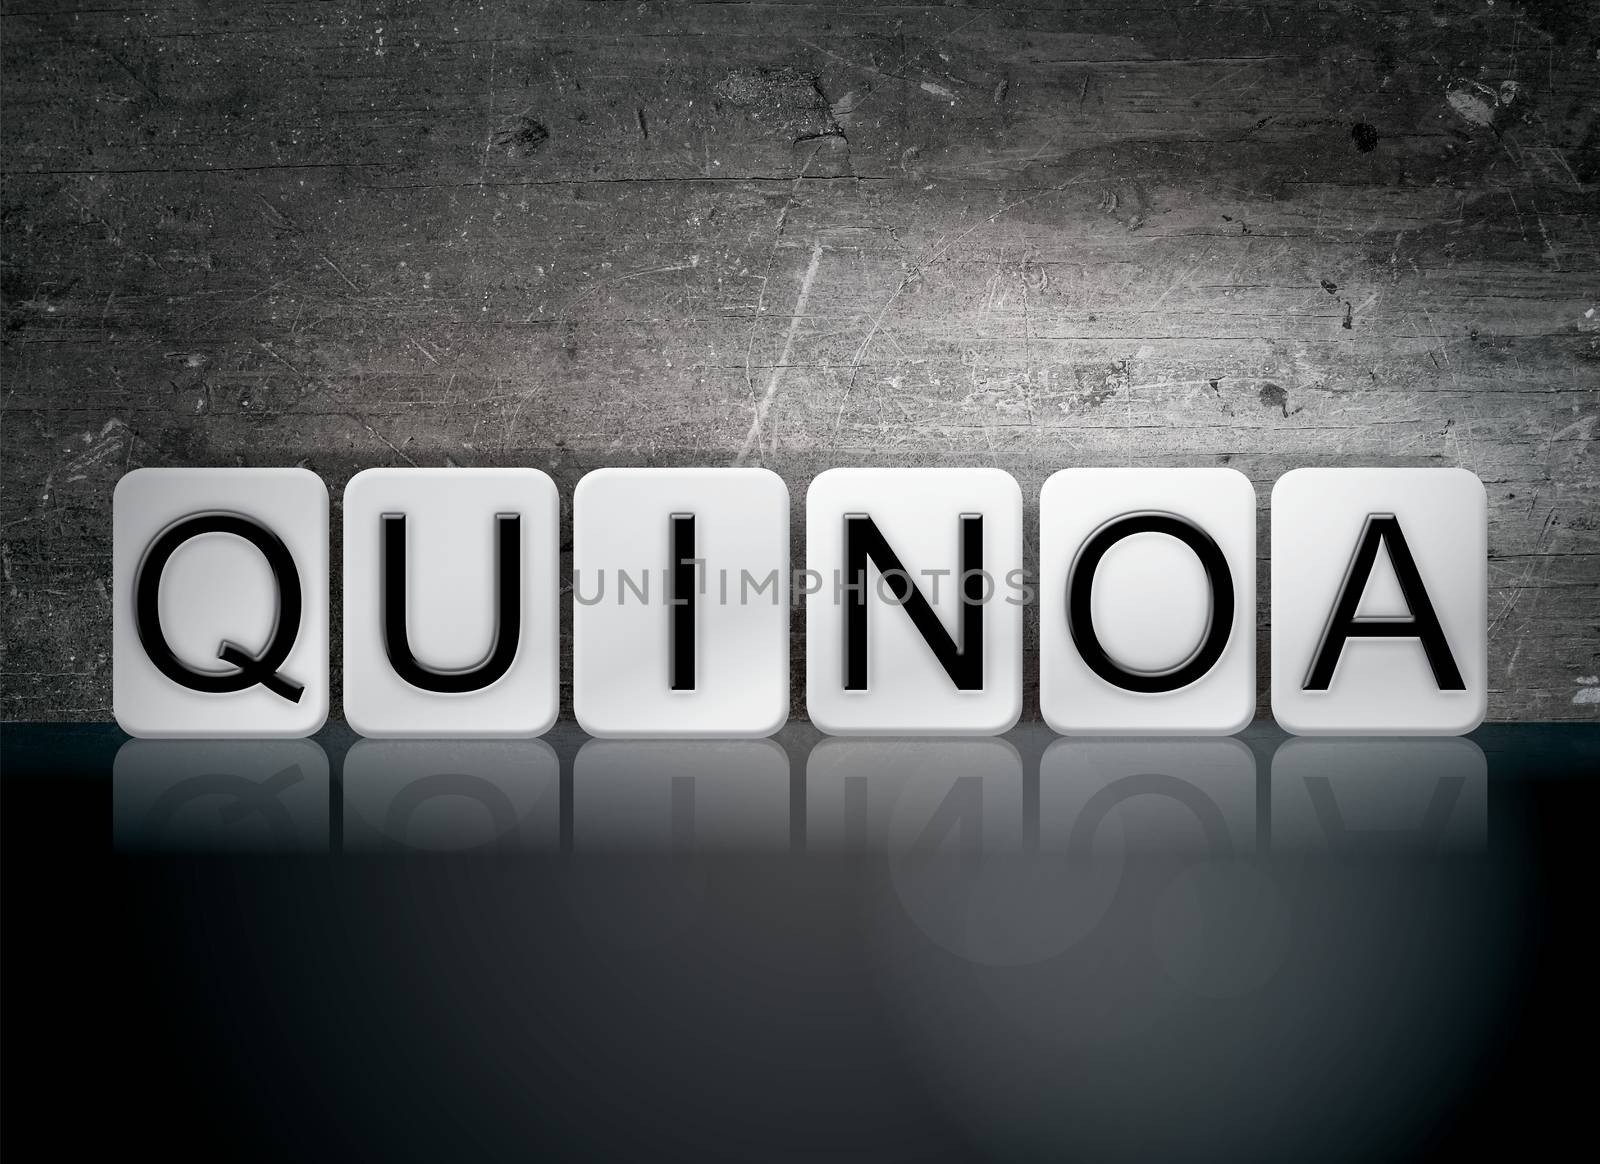 Quinoa Tiled Letters Concept and Theme by enterlinedesign